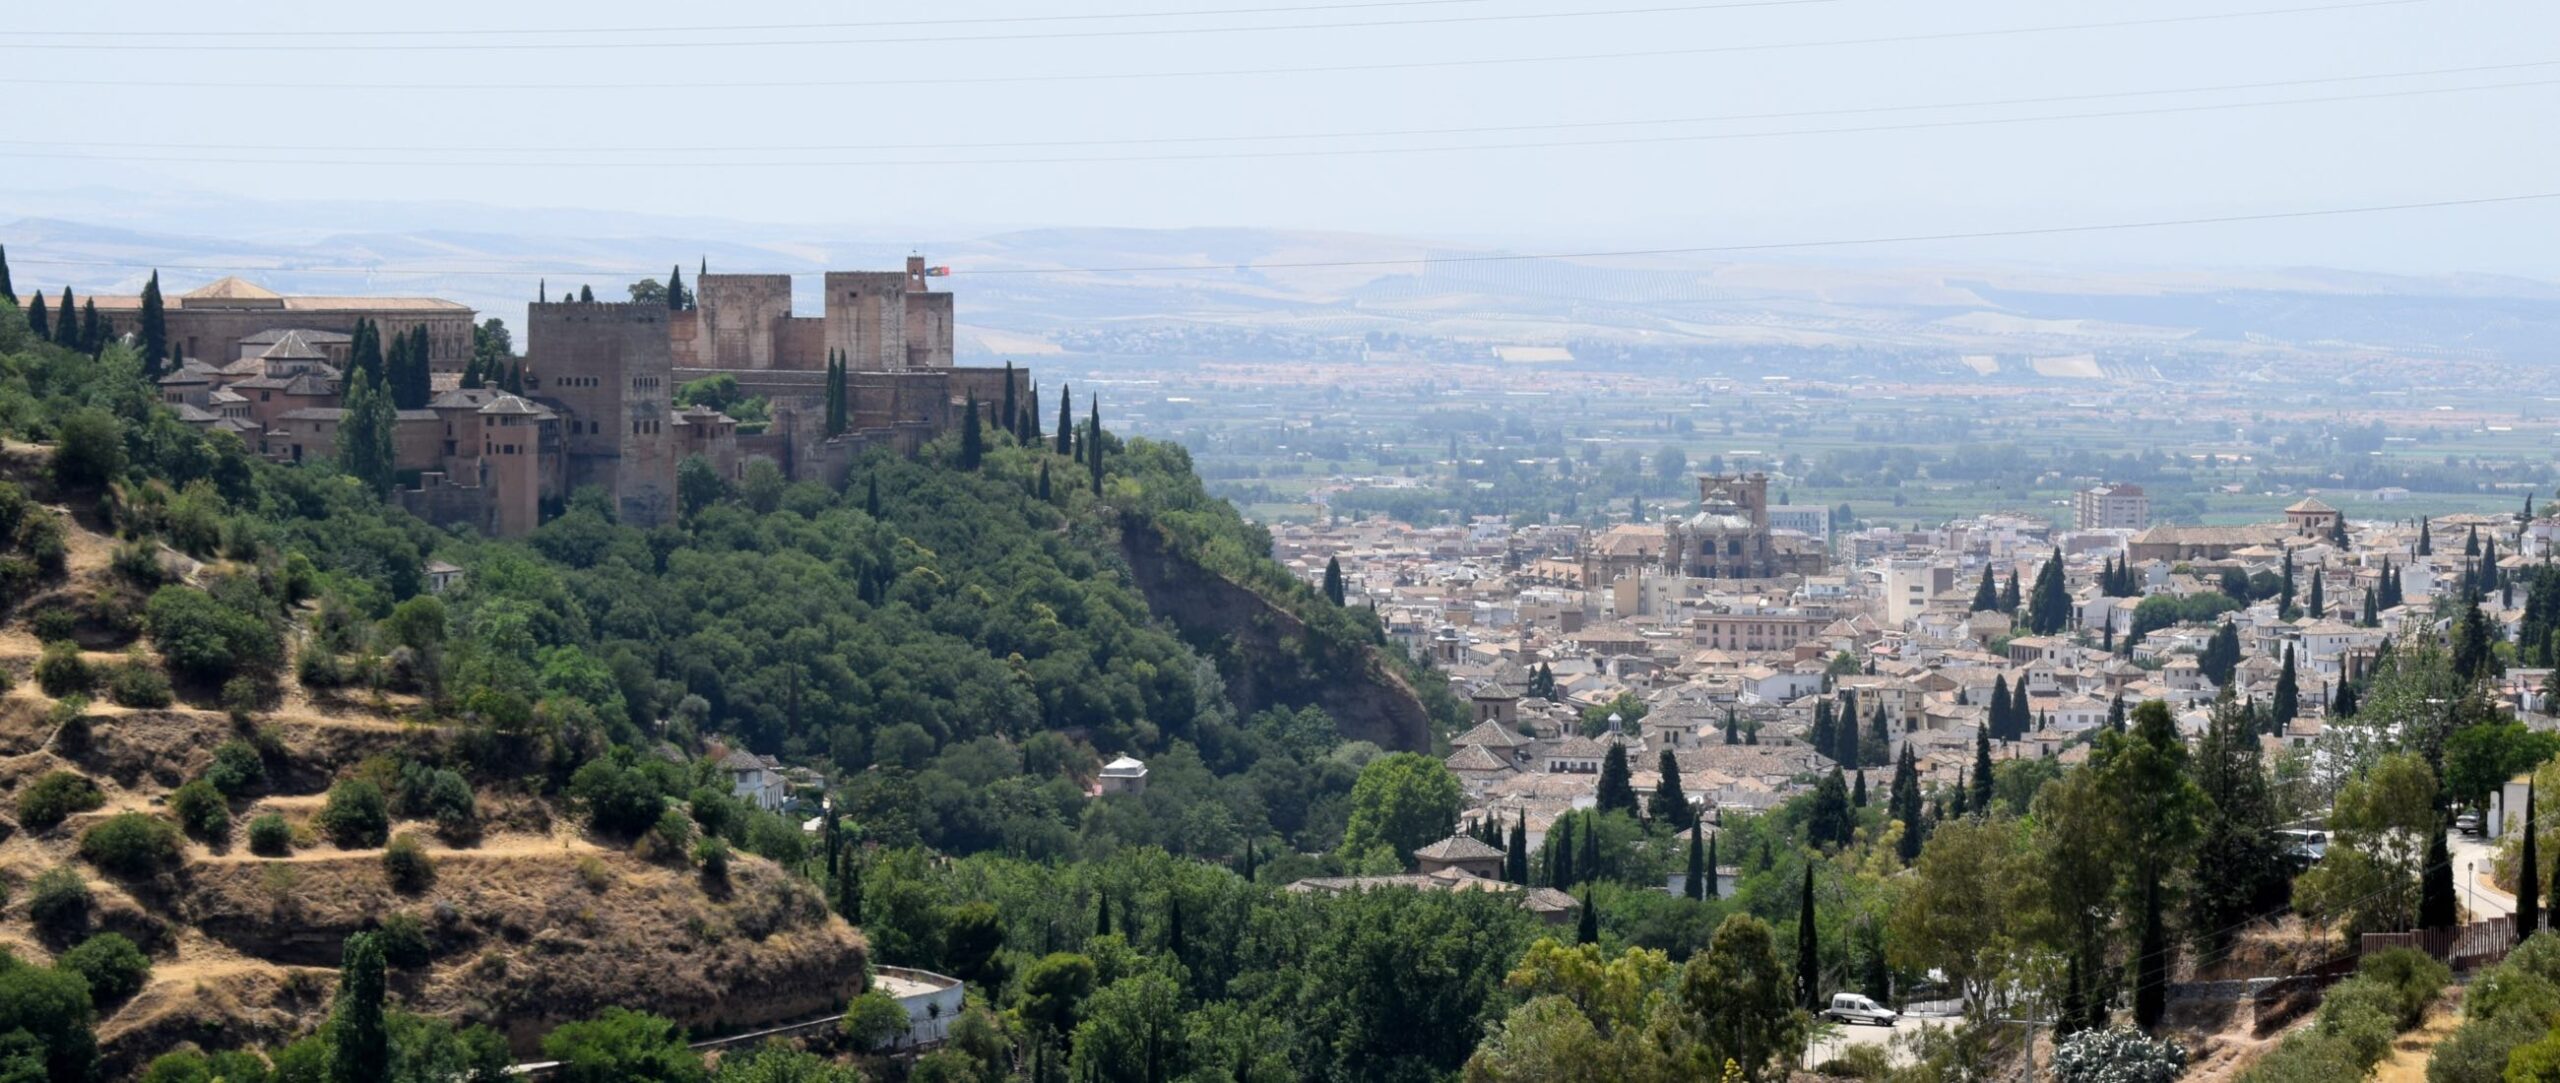 2-Days-in-Granada-Exploring-the-city-at-the-feet-of-the-Mountains